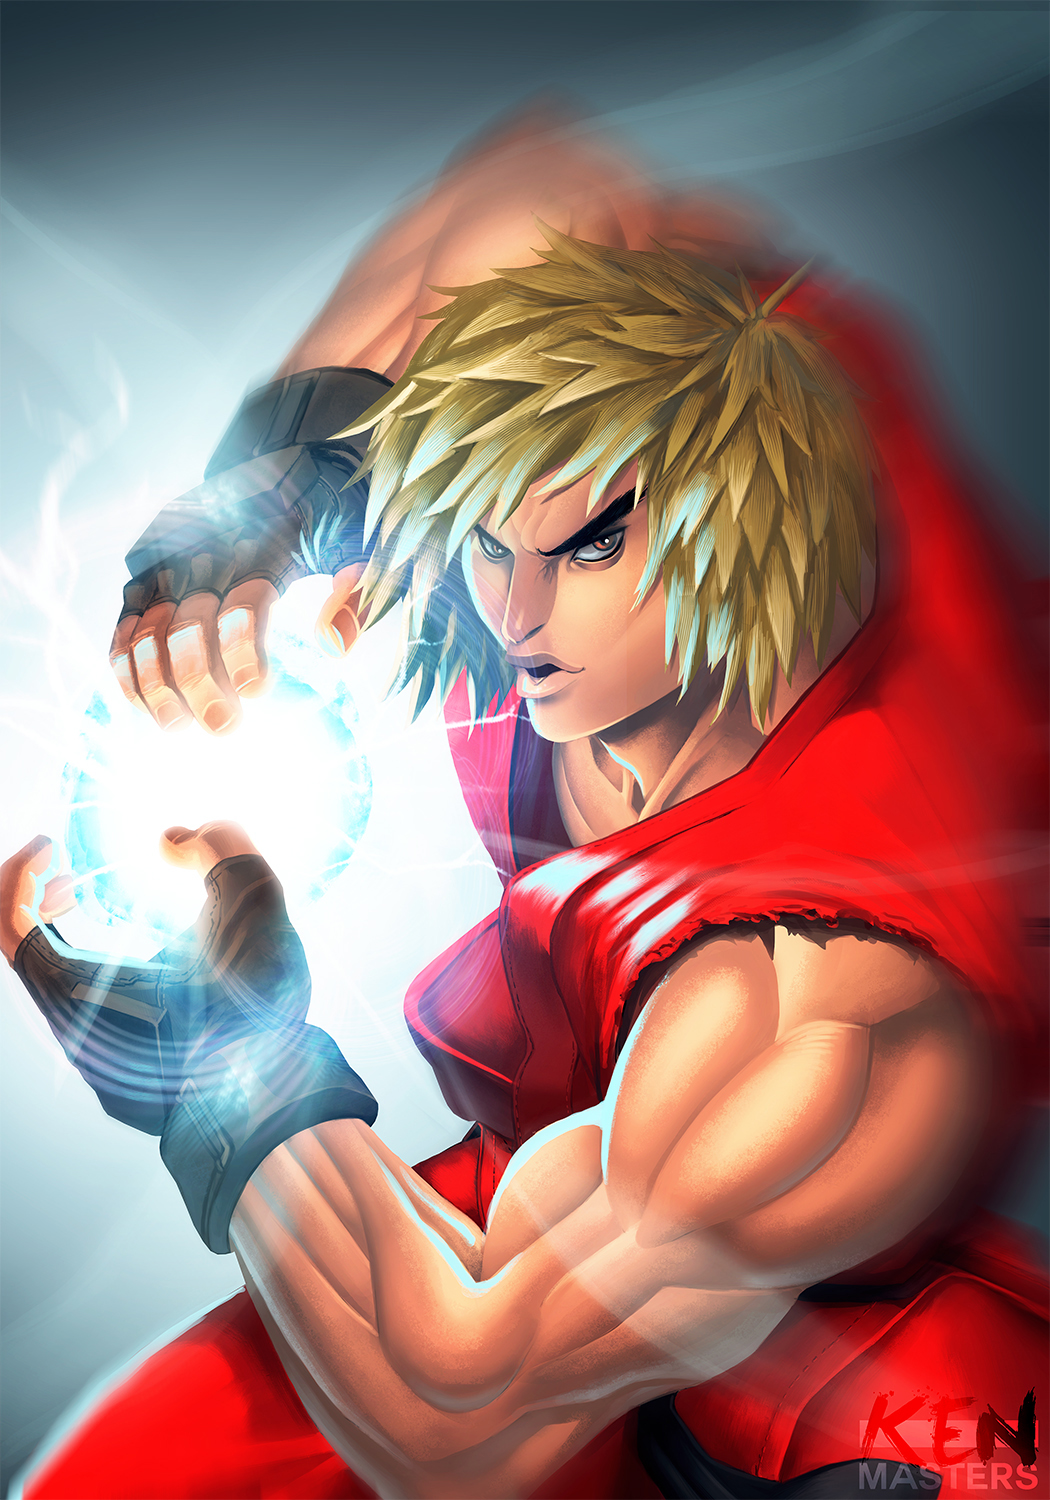 Anime Anime Boys Video Game Characters Video Games Anime Games Street Fighter Ken Masters Short Hair 1050x1500